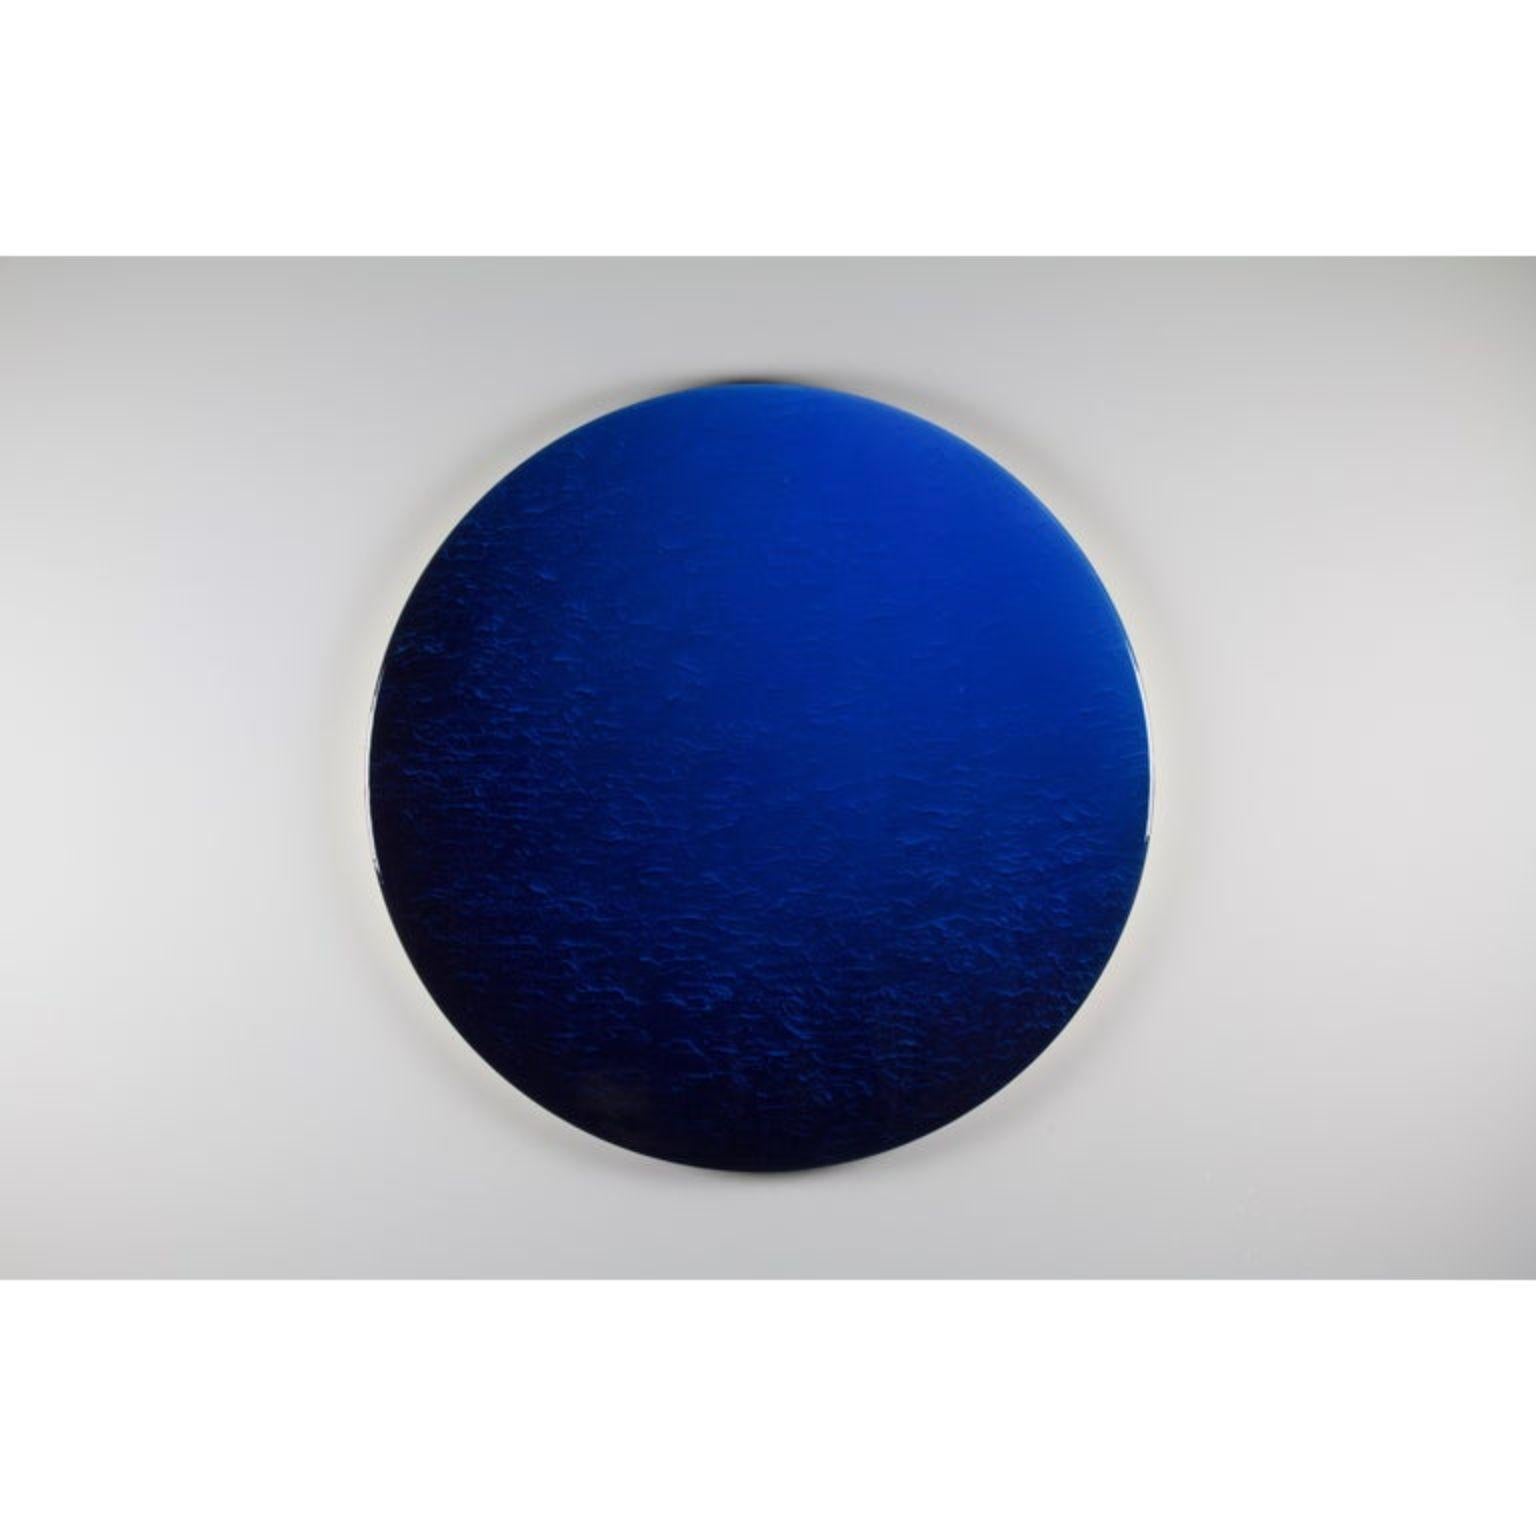 Two kinds of people minimalistic round by Corine Vanvoorbergen
Dimensions: diameter 50 cm
Materials: Brass, wood, natural pigments, epoxy and acrylics

There are two kinds of people. Those that see the night coming and those that see the day